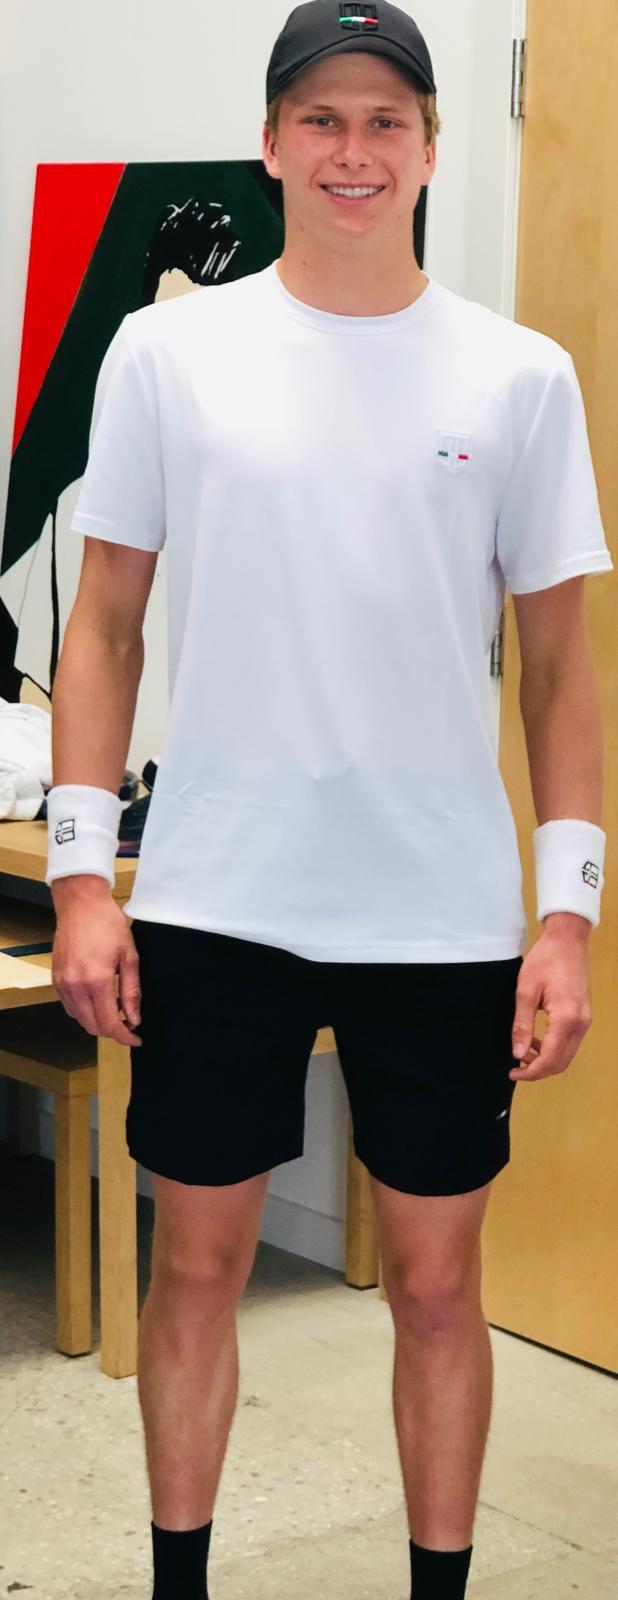 Parsa on X: ".@Uomo_Sport has signed rising American star Jenson Brooksby to  a multiyear agreement. The '18 Kalamazoo champ left Baylor early to turn  pro in fall '20. UOMO, based in CA,